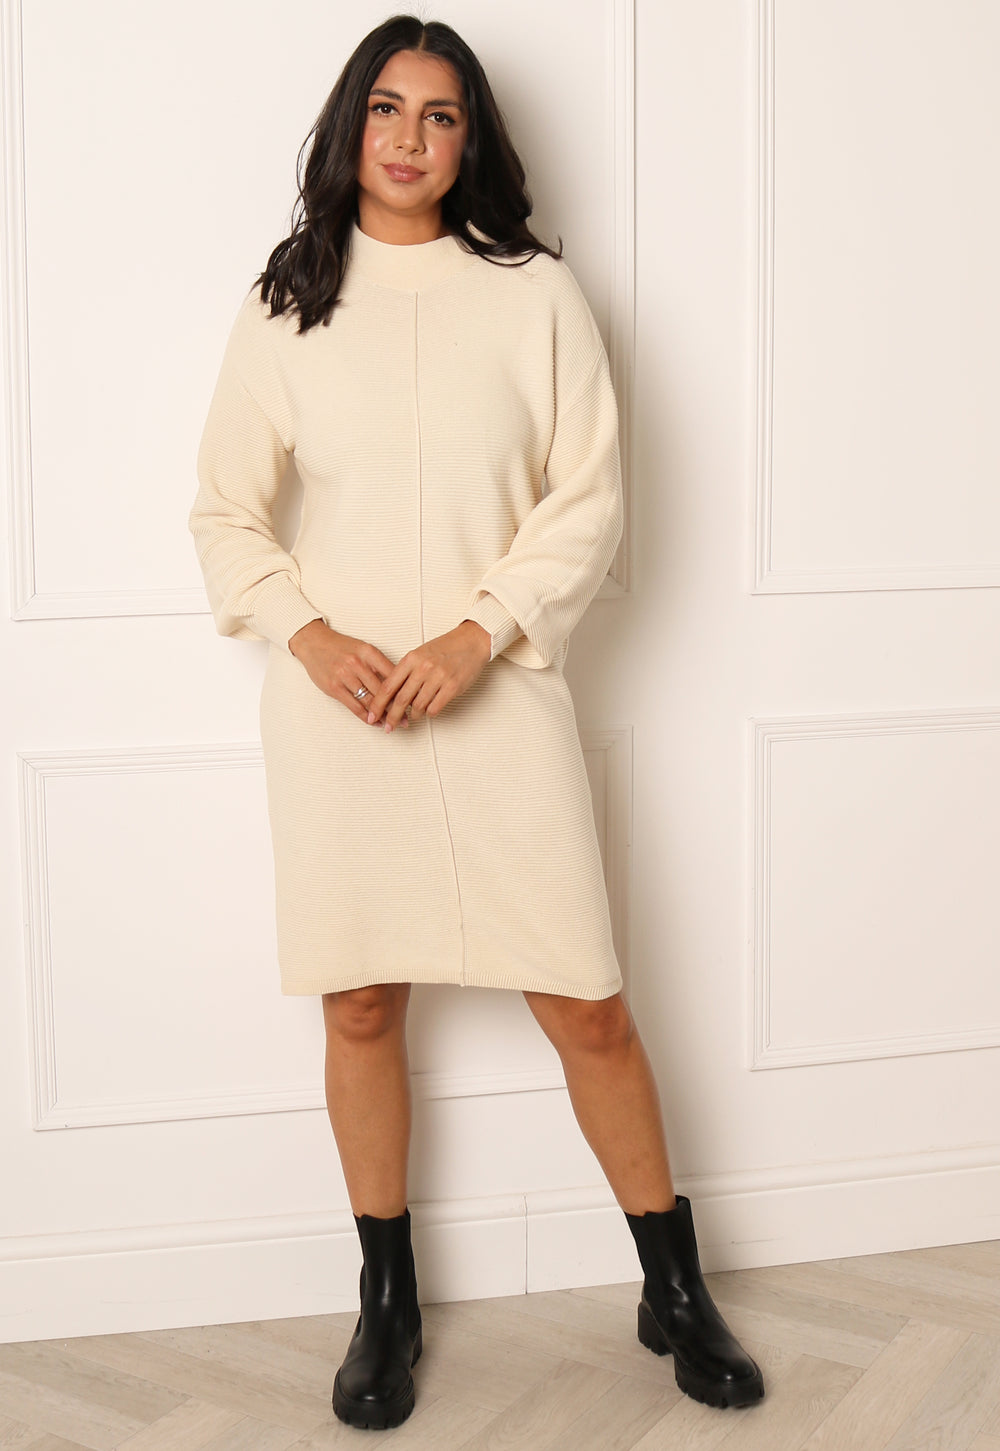 VILA Stacy Funnel Neck Rib Knit Cotton Jumper Dress in Cream - One Nation Clothing